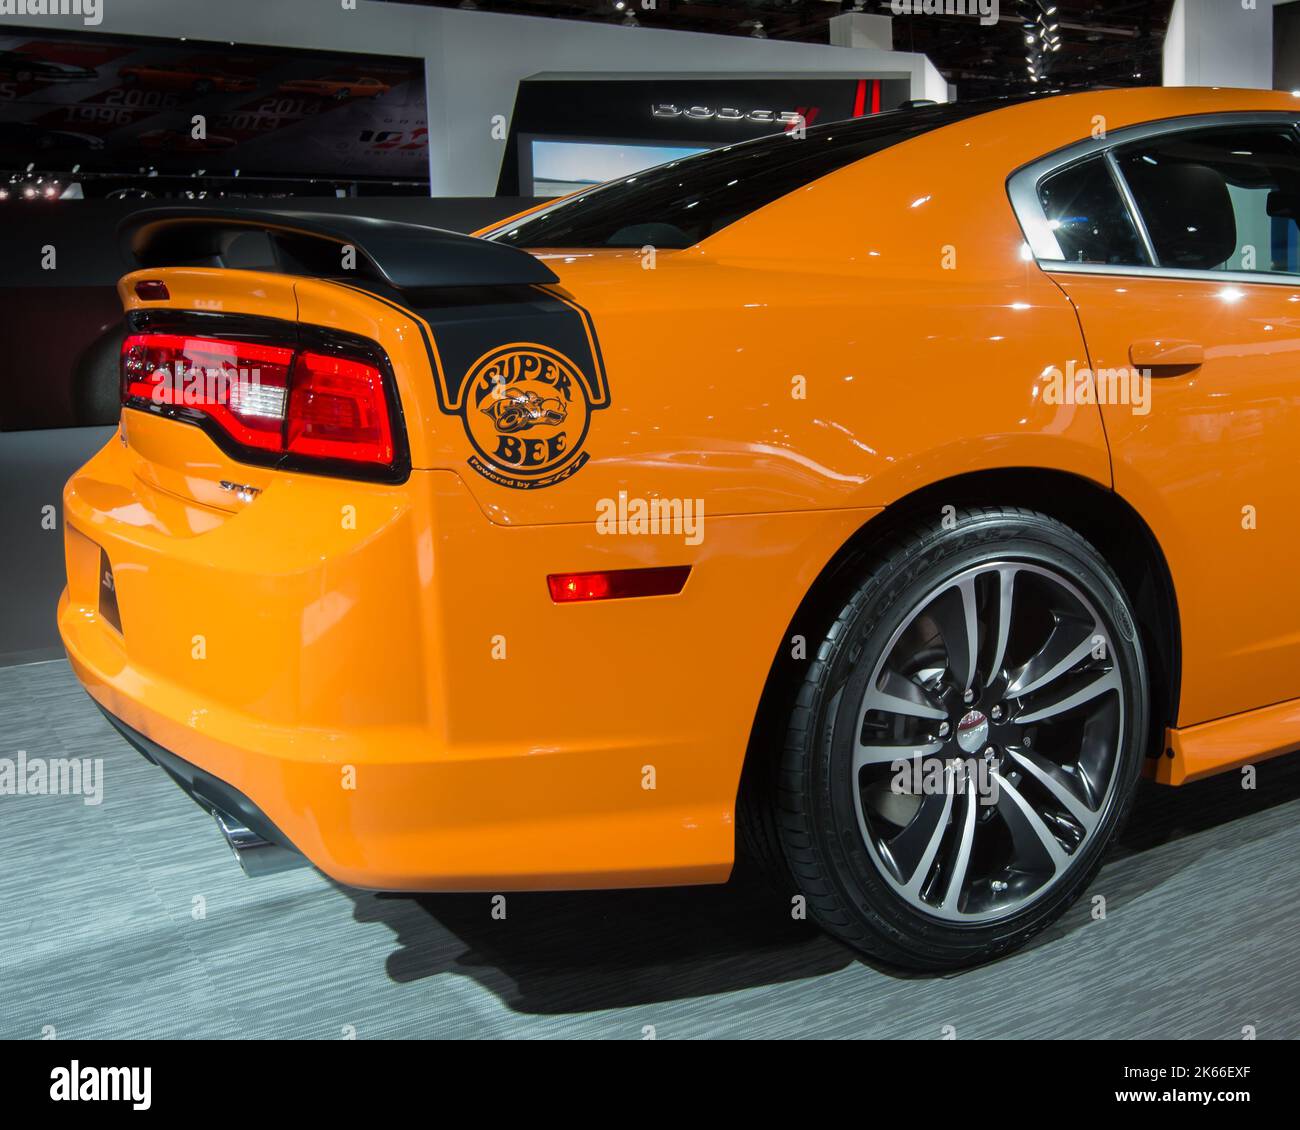 DETROIT, MI/USA - JANUARY 15: A 2014 Dodge Charger Super Bee car at the North American International Auto Show (NAIAS). Stock Photo